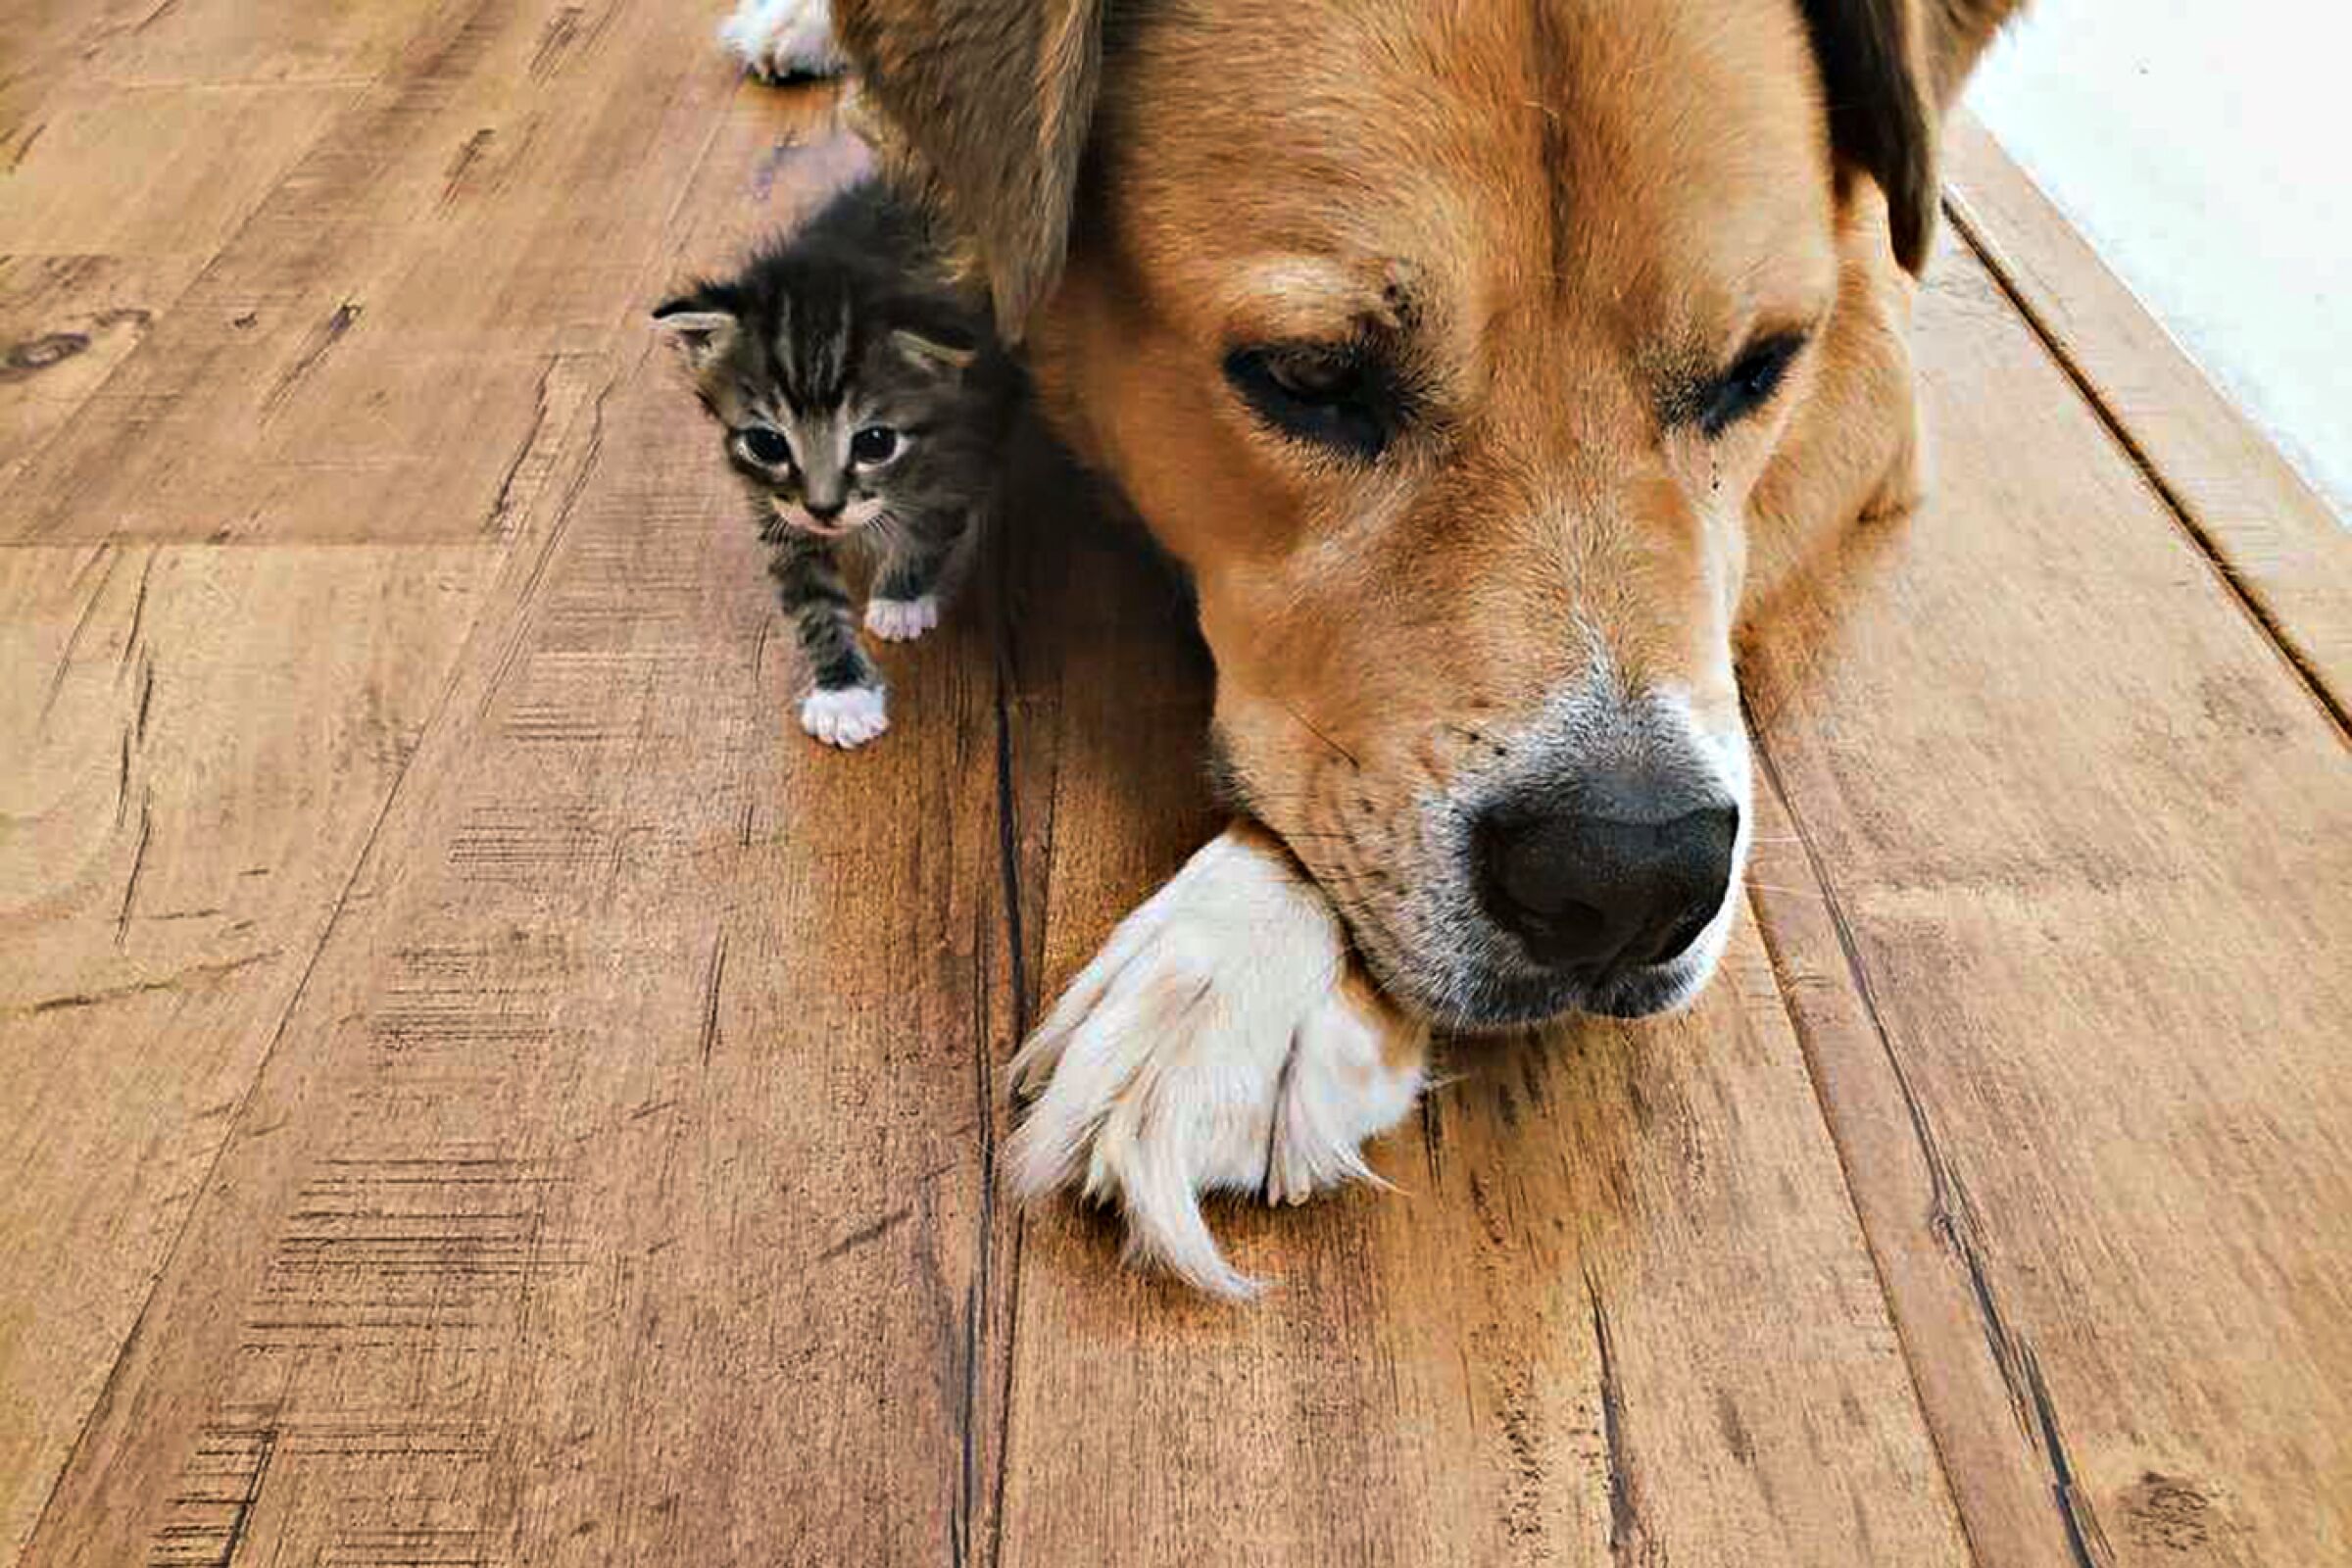 A small kitten walks next to a dog lying down.